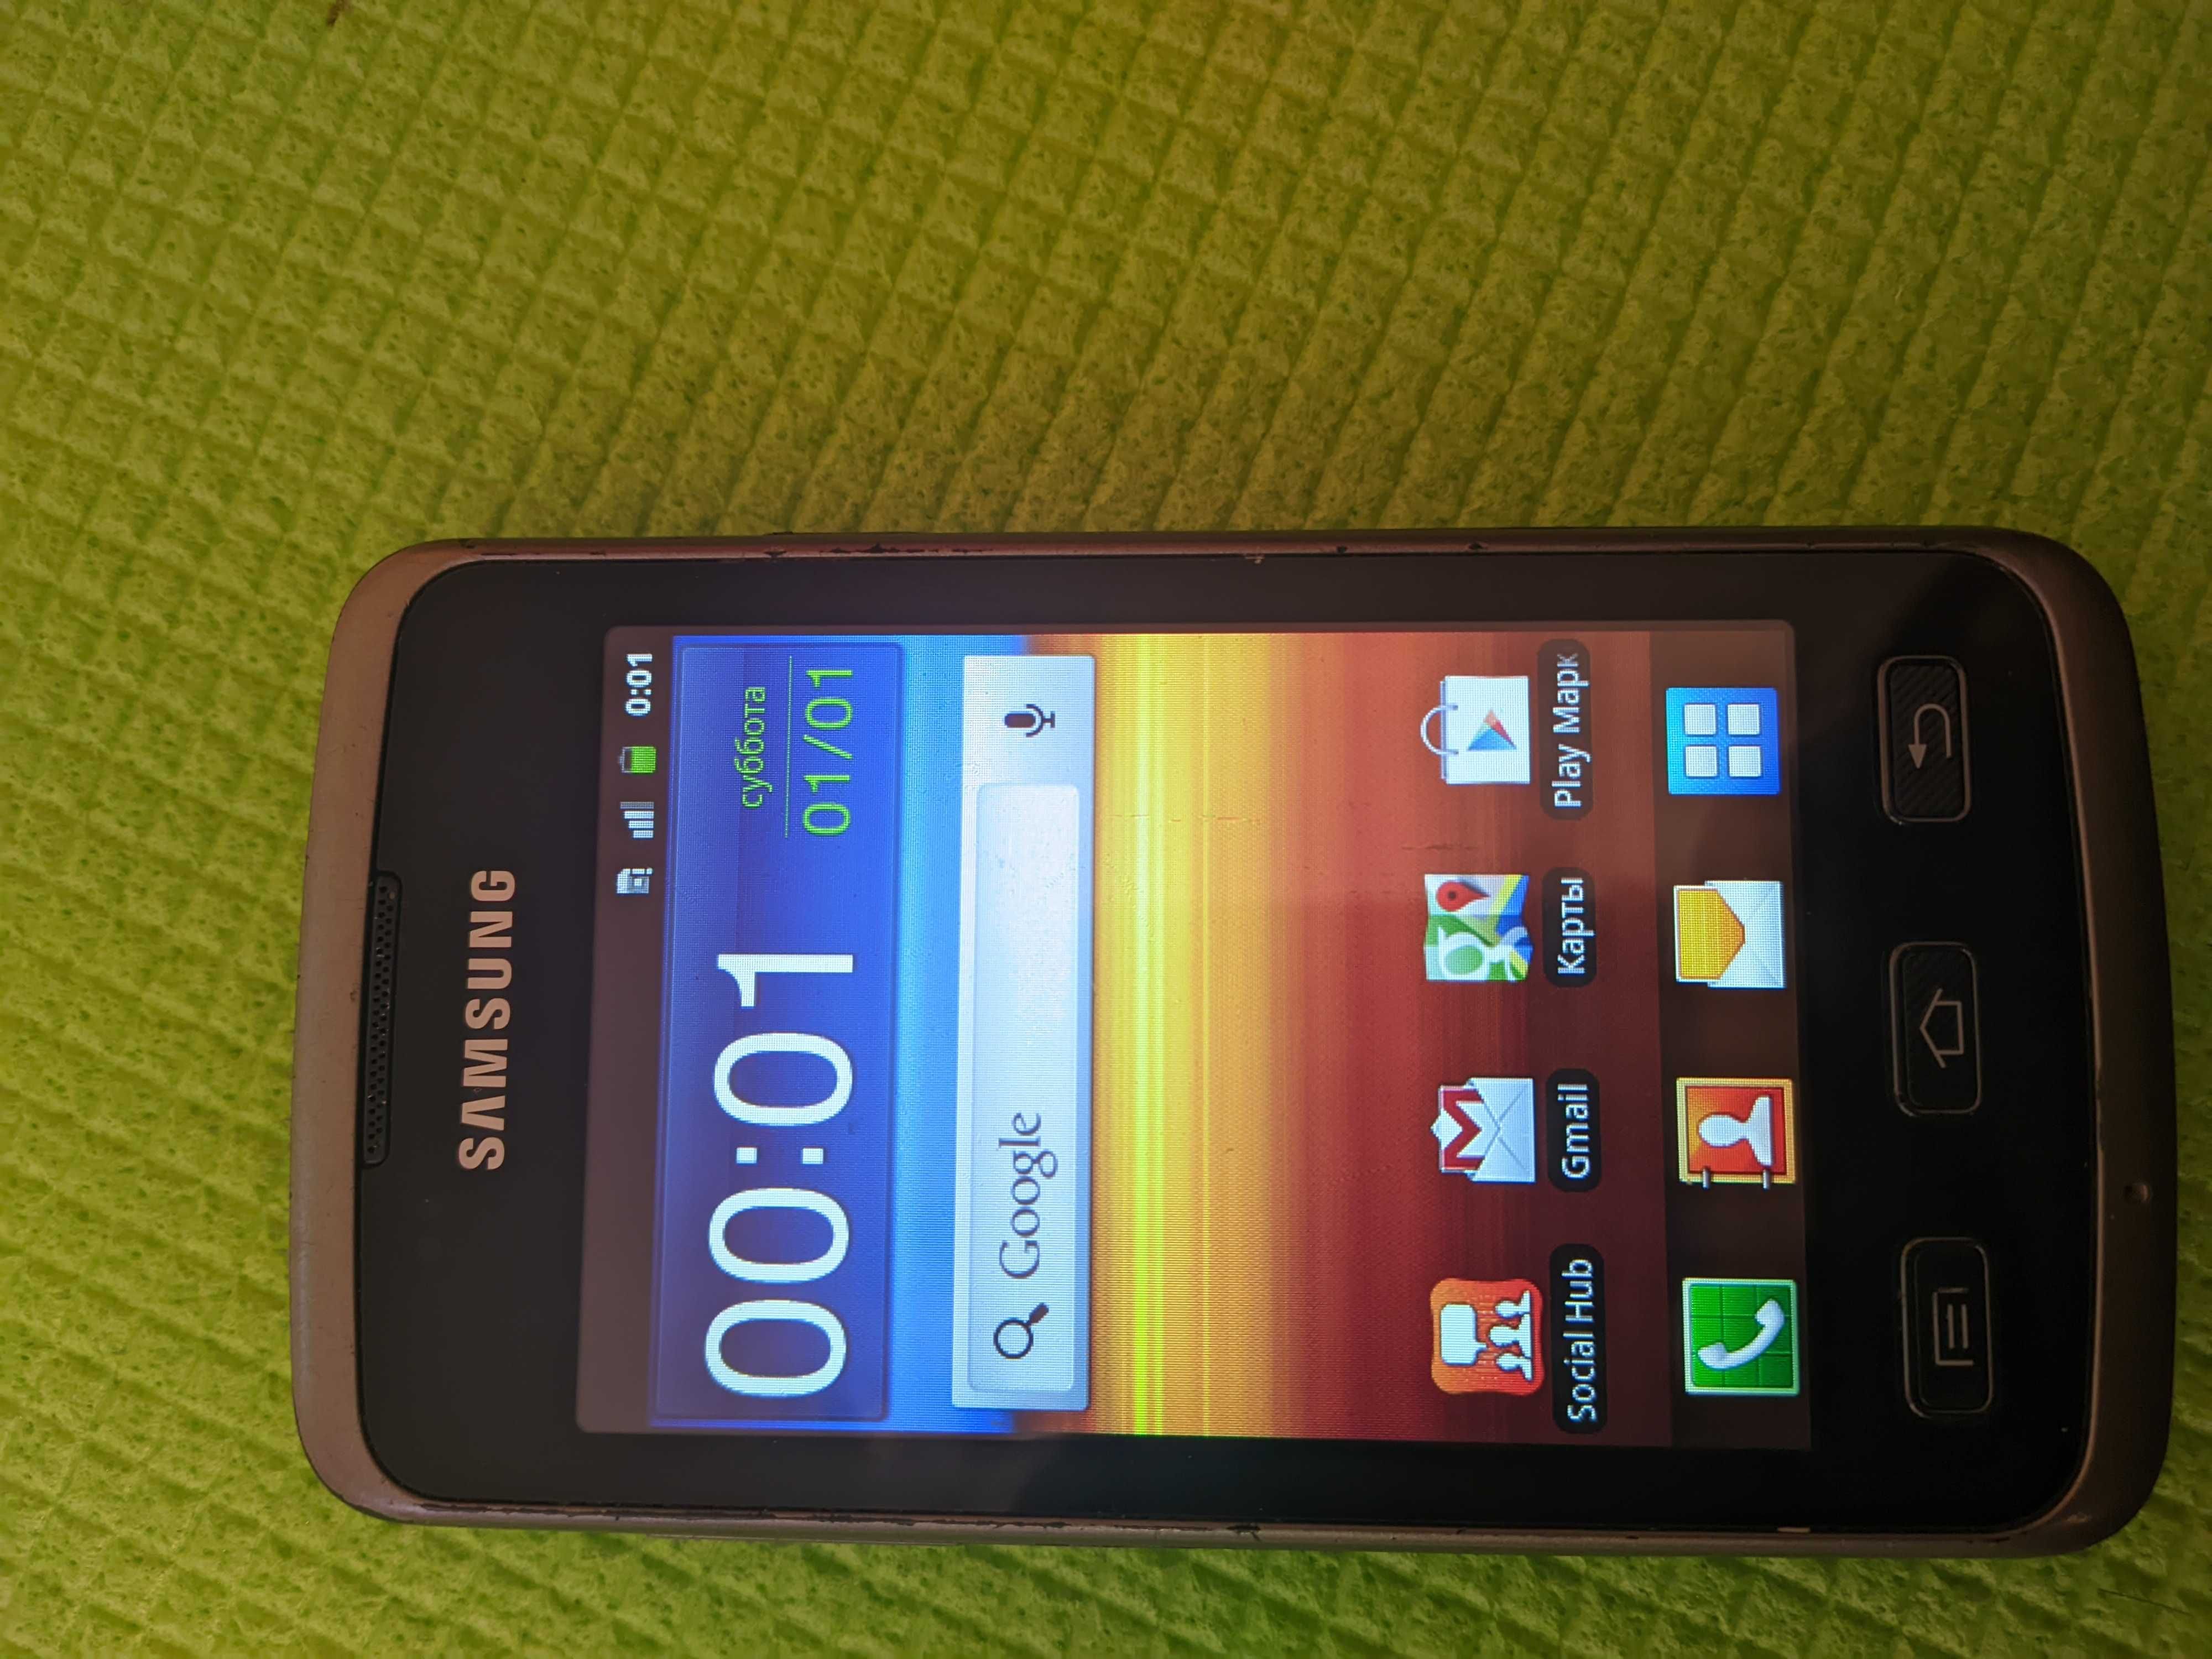 Samsung Xcover S5690